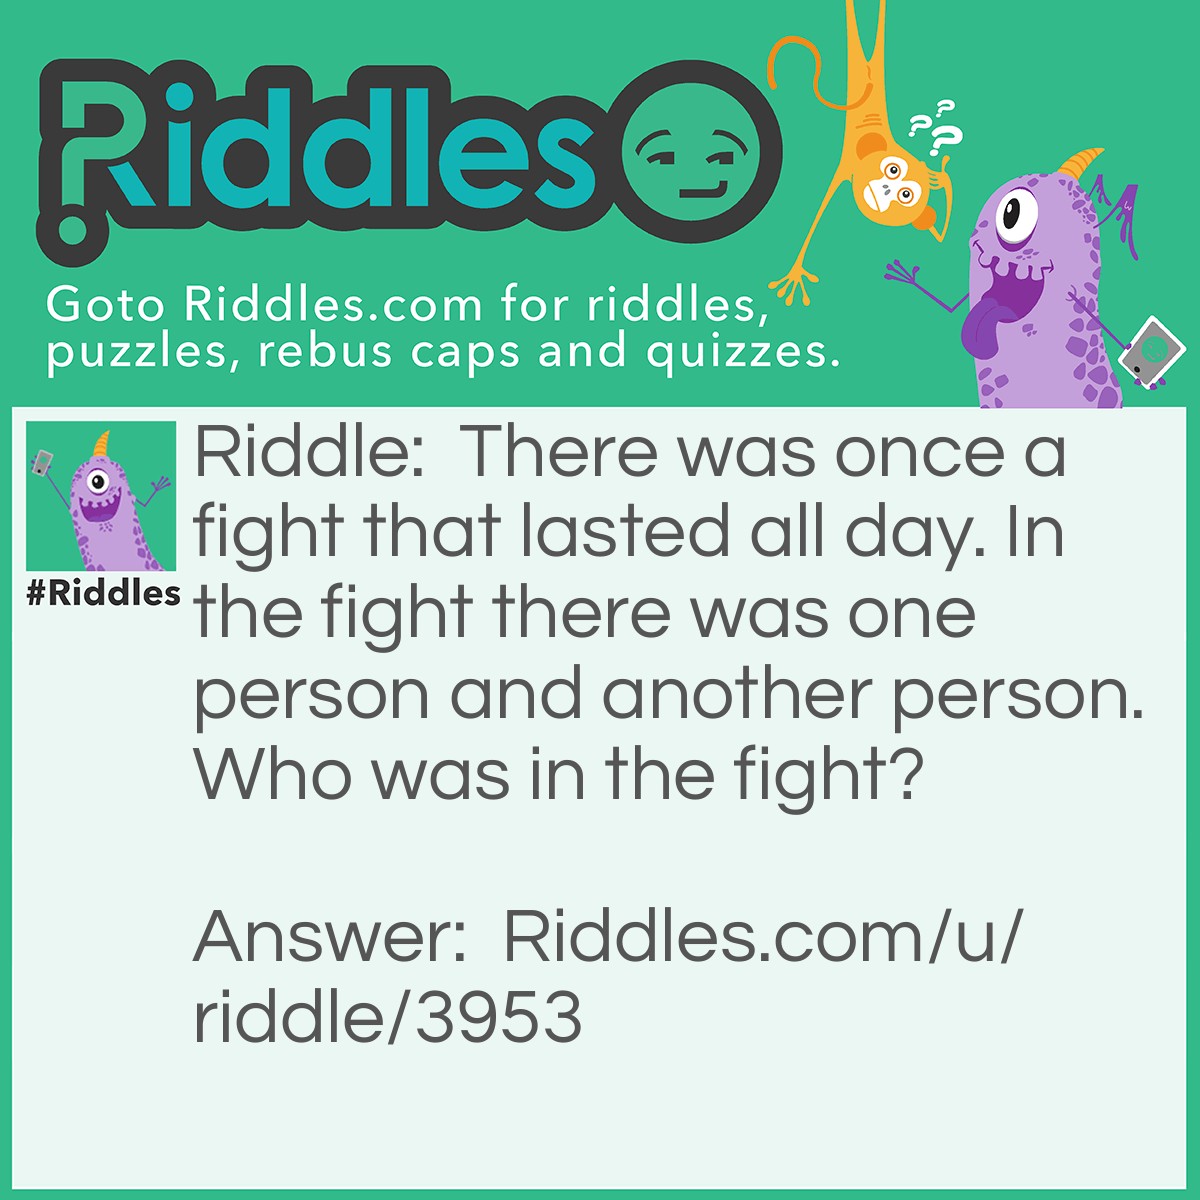 Riddle: There was once a fight that lasted all day. In the fight there was one person and another person. Who was in the fight? Answer: In the fight there were two people.